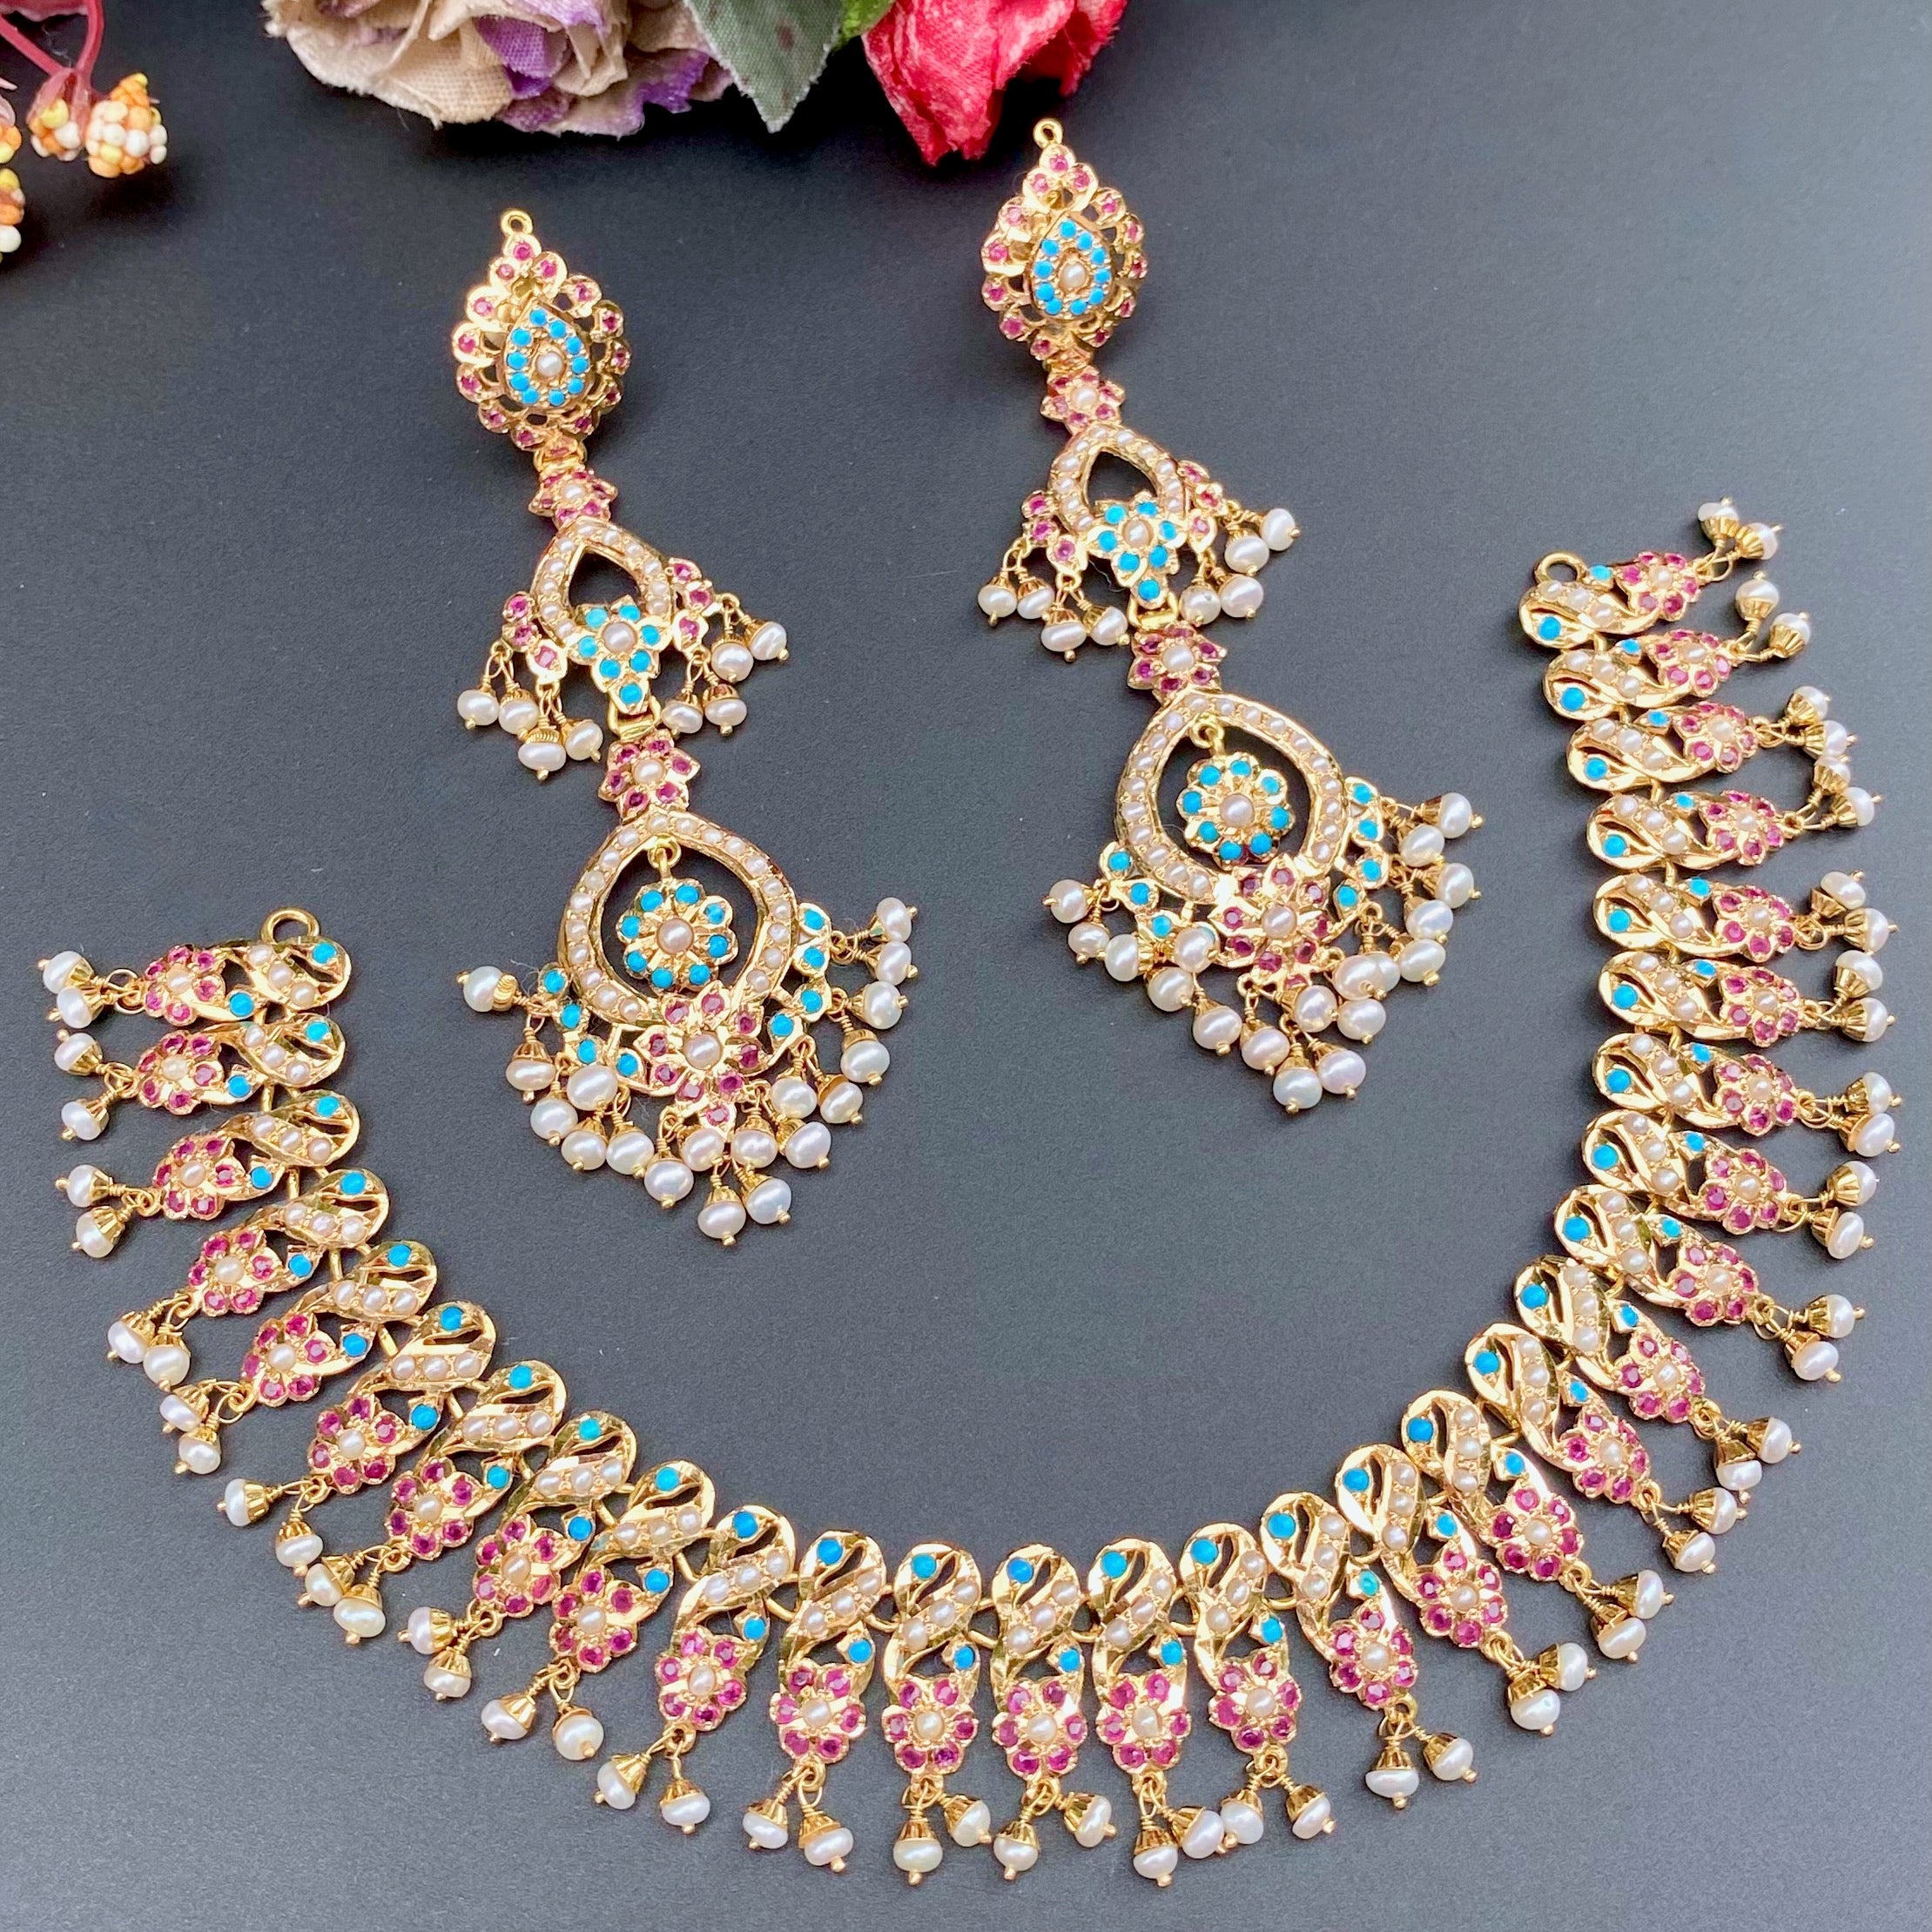 22k rajputi gold necklace set with long three step earrings studded with pearls ruby and feroza